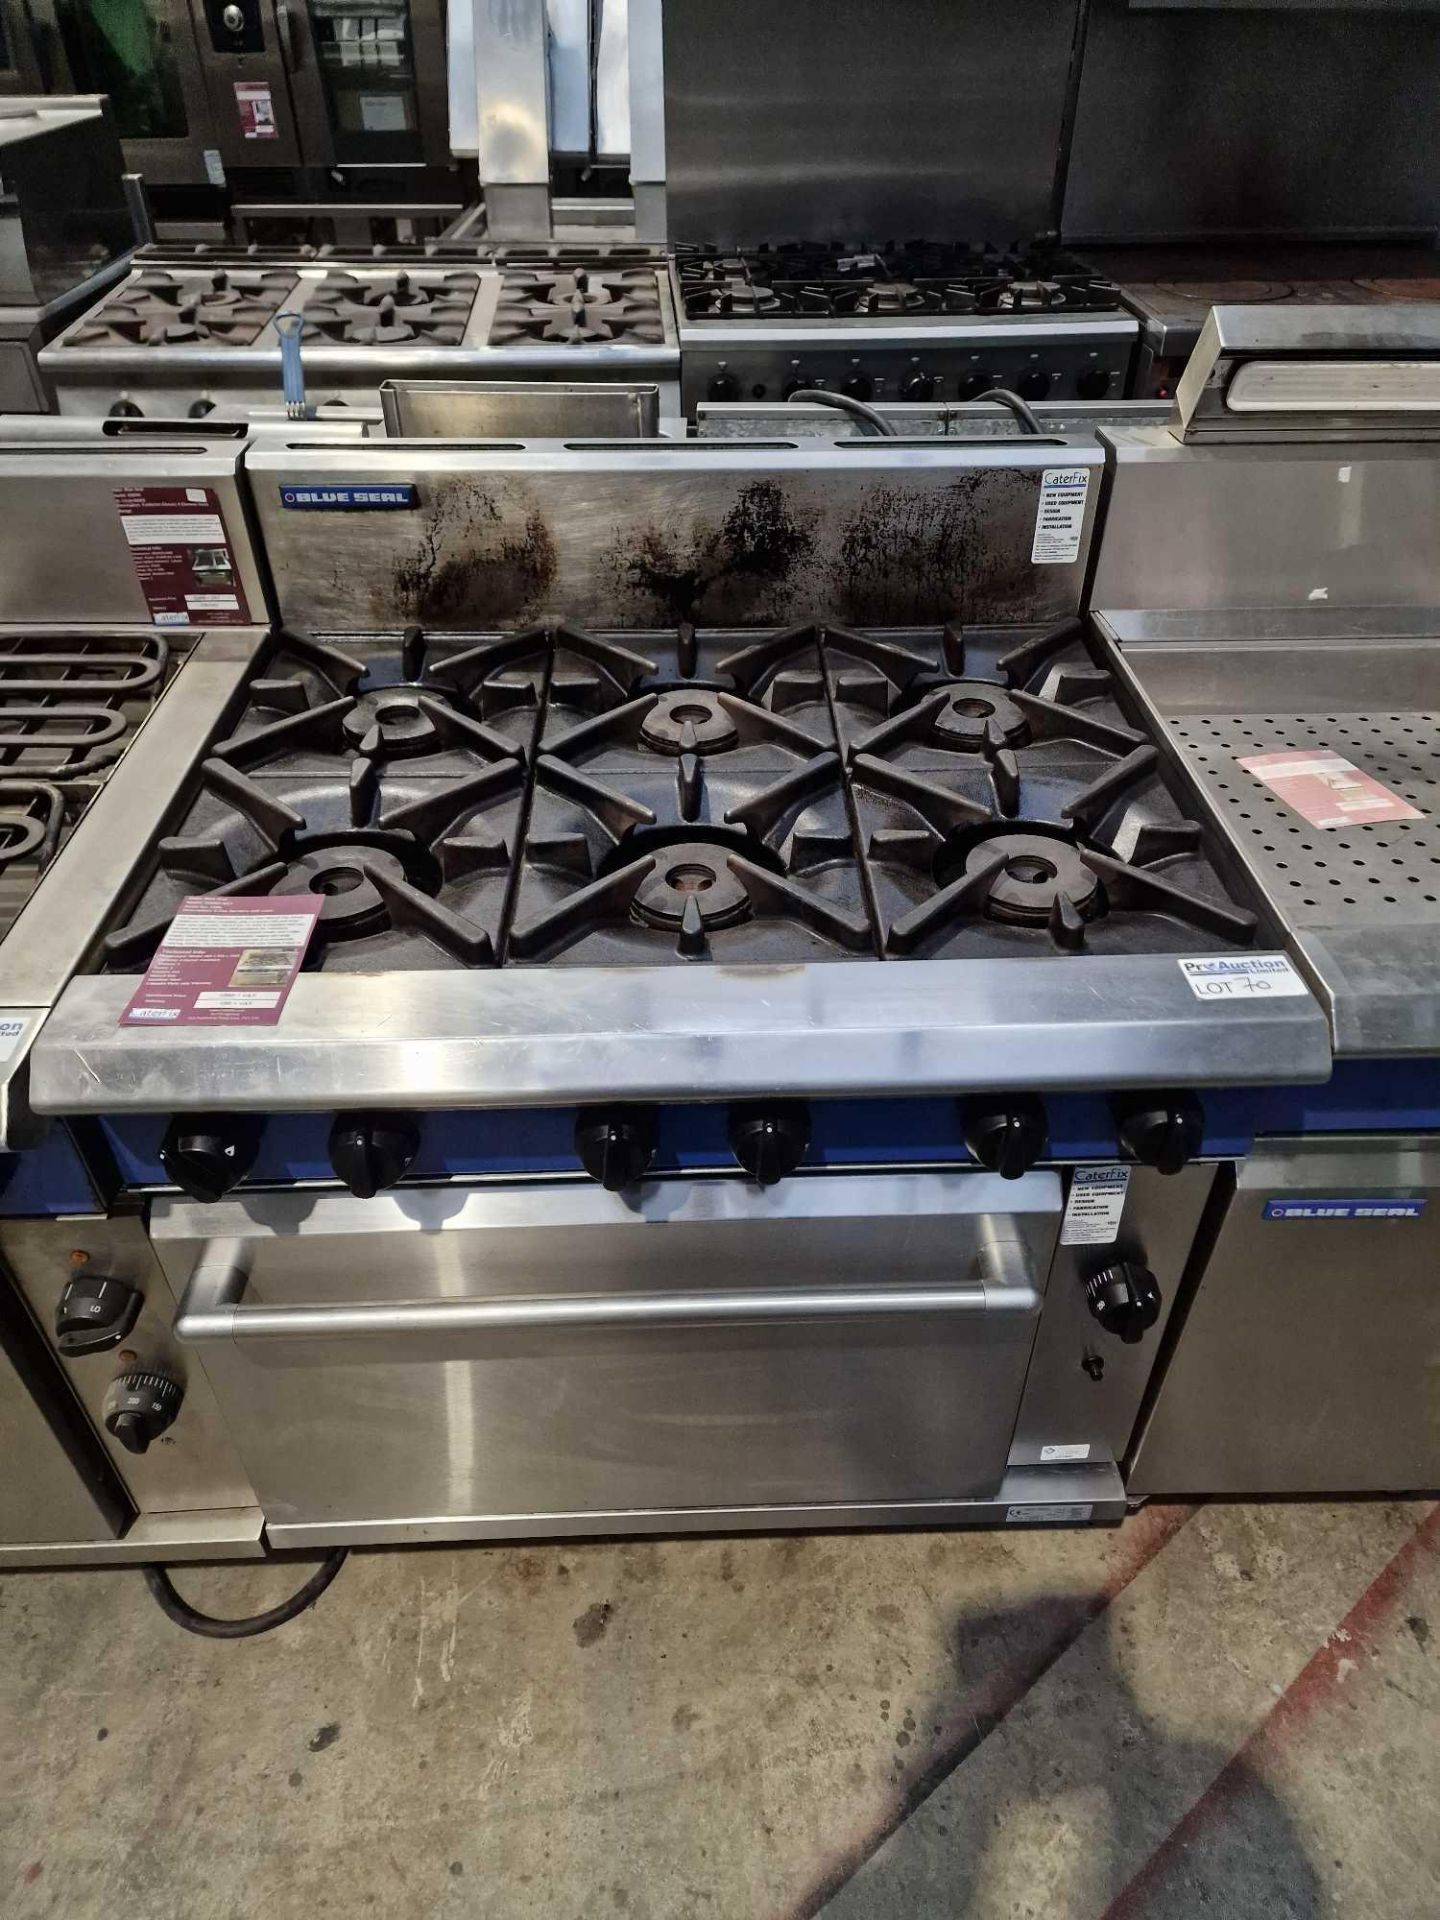 Blue Seal Stainless Steel 6 Gas Burners with oven - The heavy duty, stainless steel Blue Seal